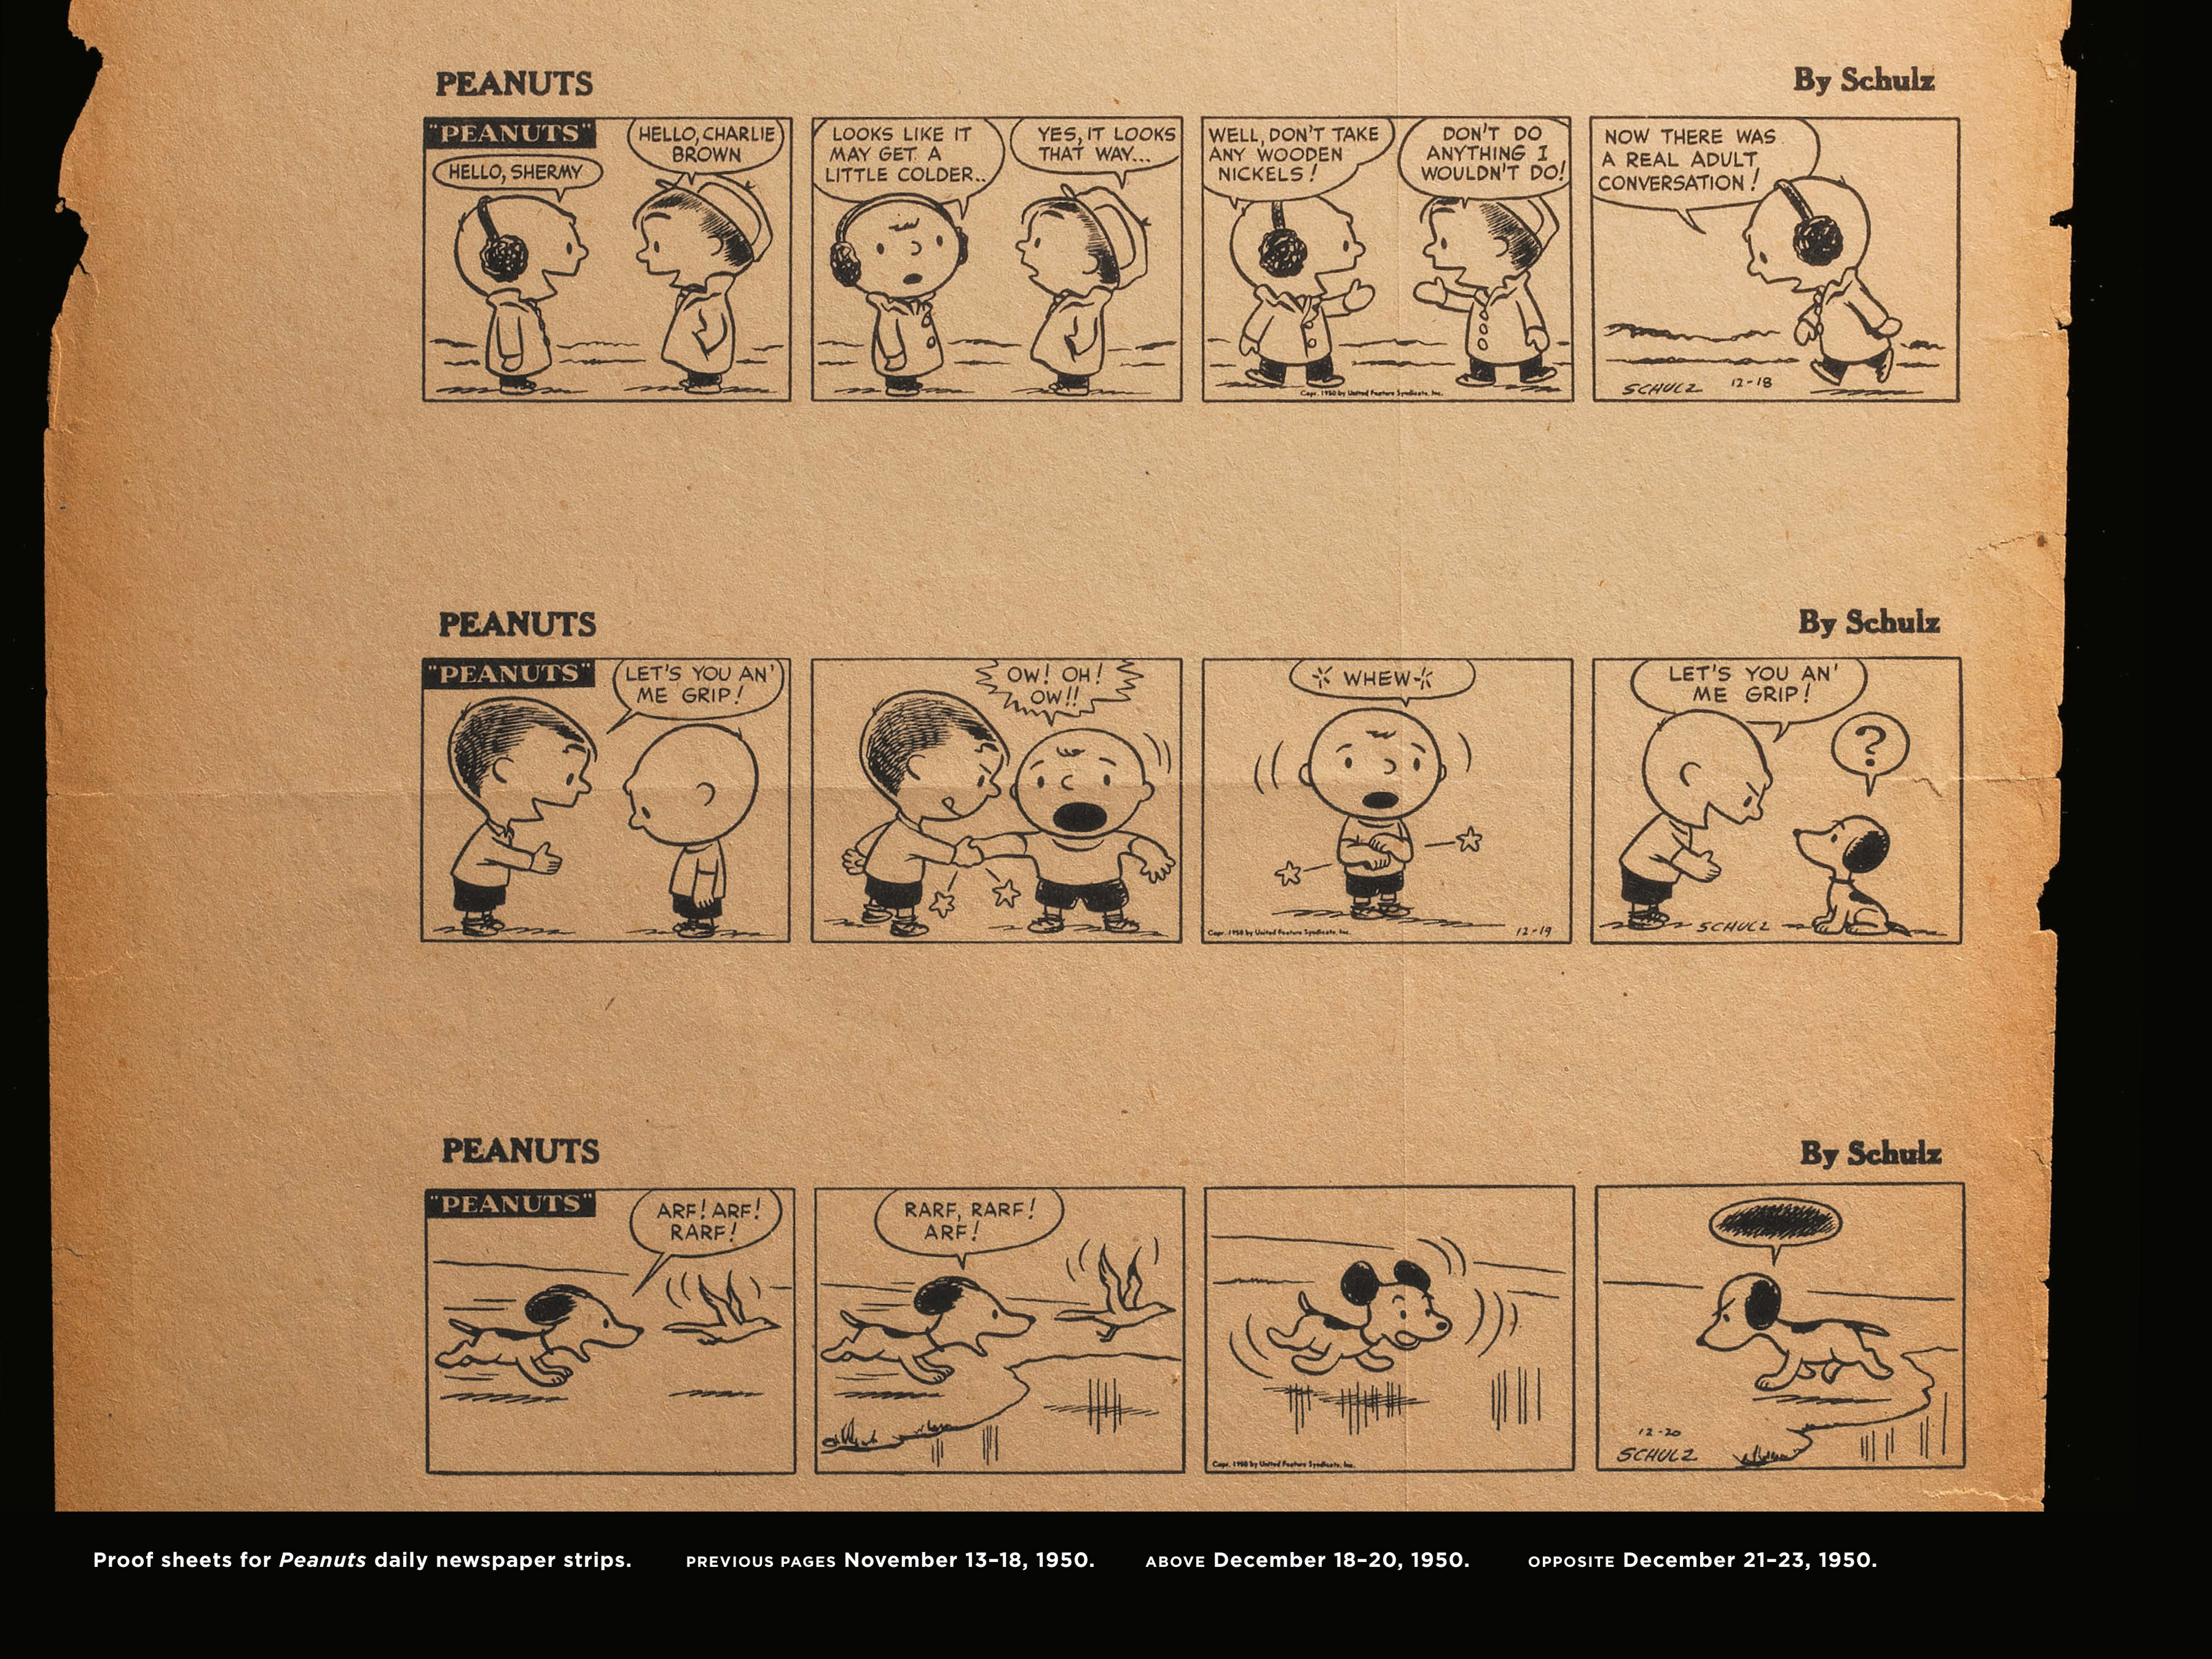 Read online Only What's Necessary: Charles M. Schulz and the Art of Peanuts comic -  Issue # TPB (Part 1) - 72